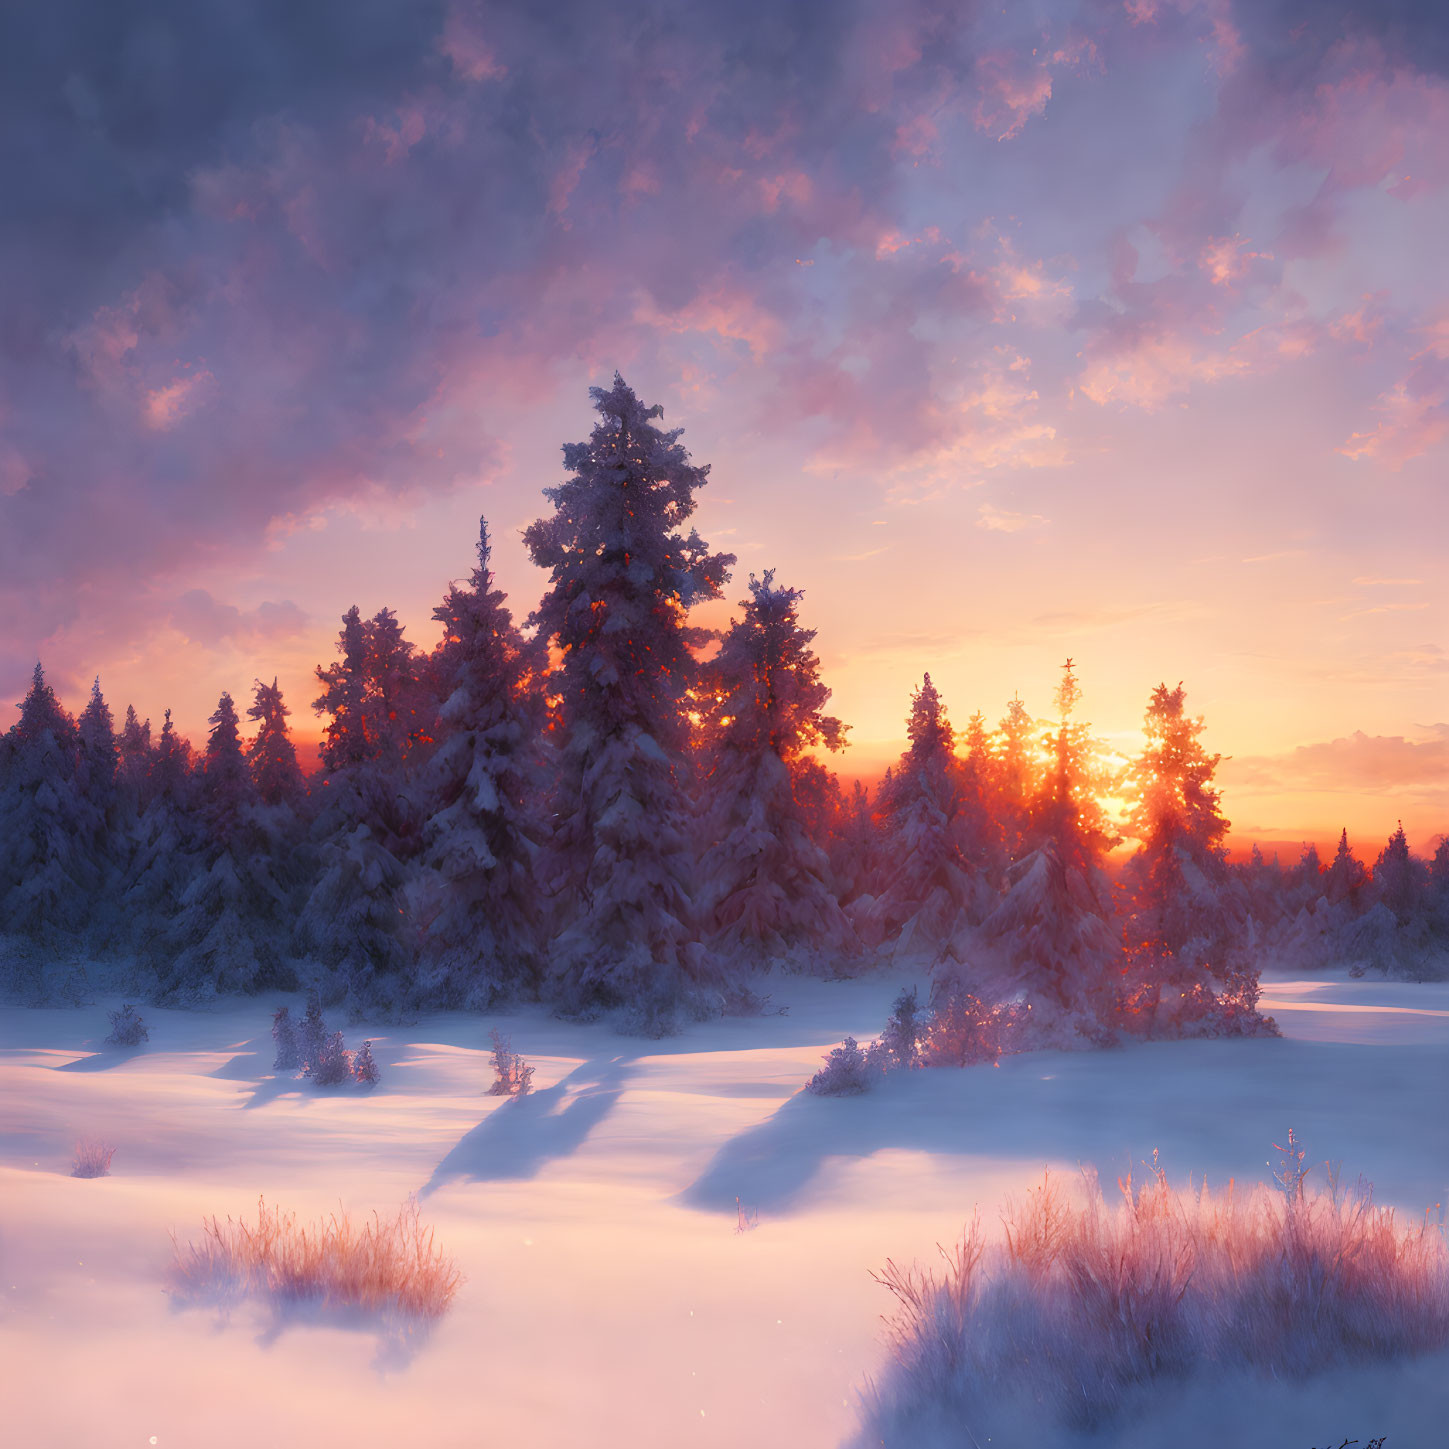 Snow-covered winter landscape with pine trees at sunset